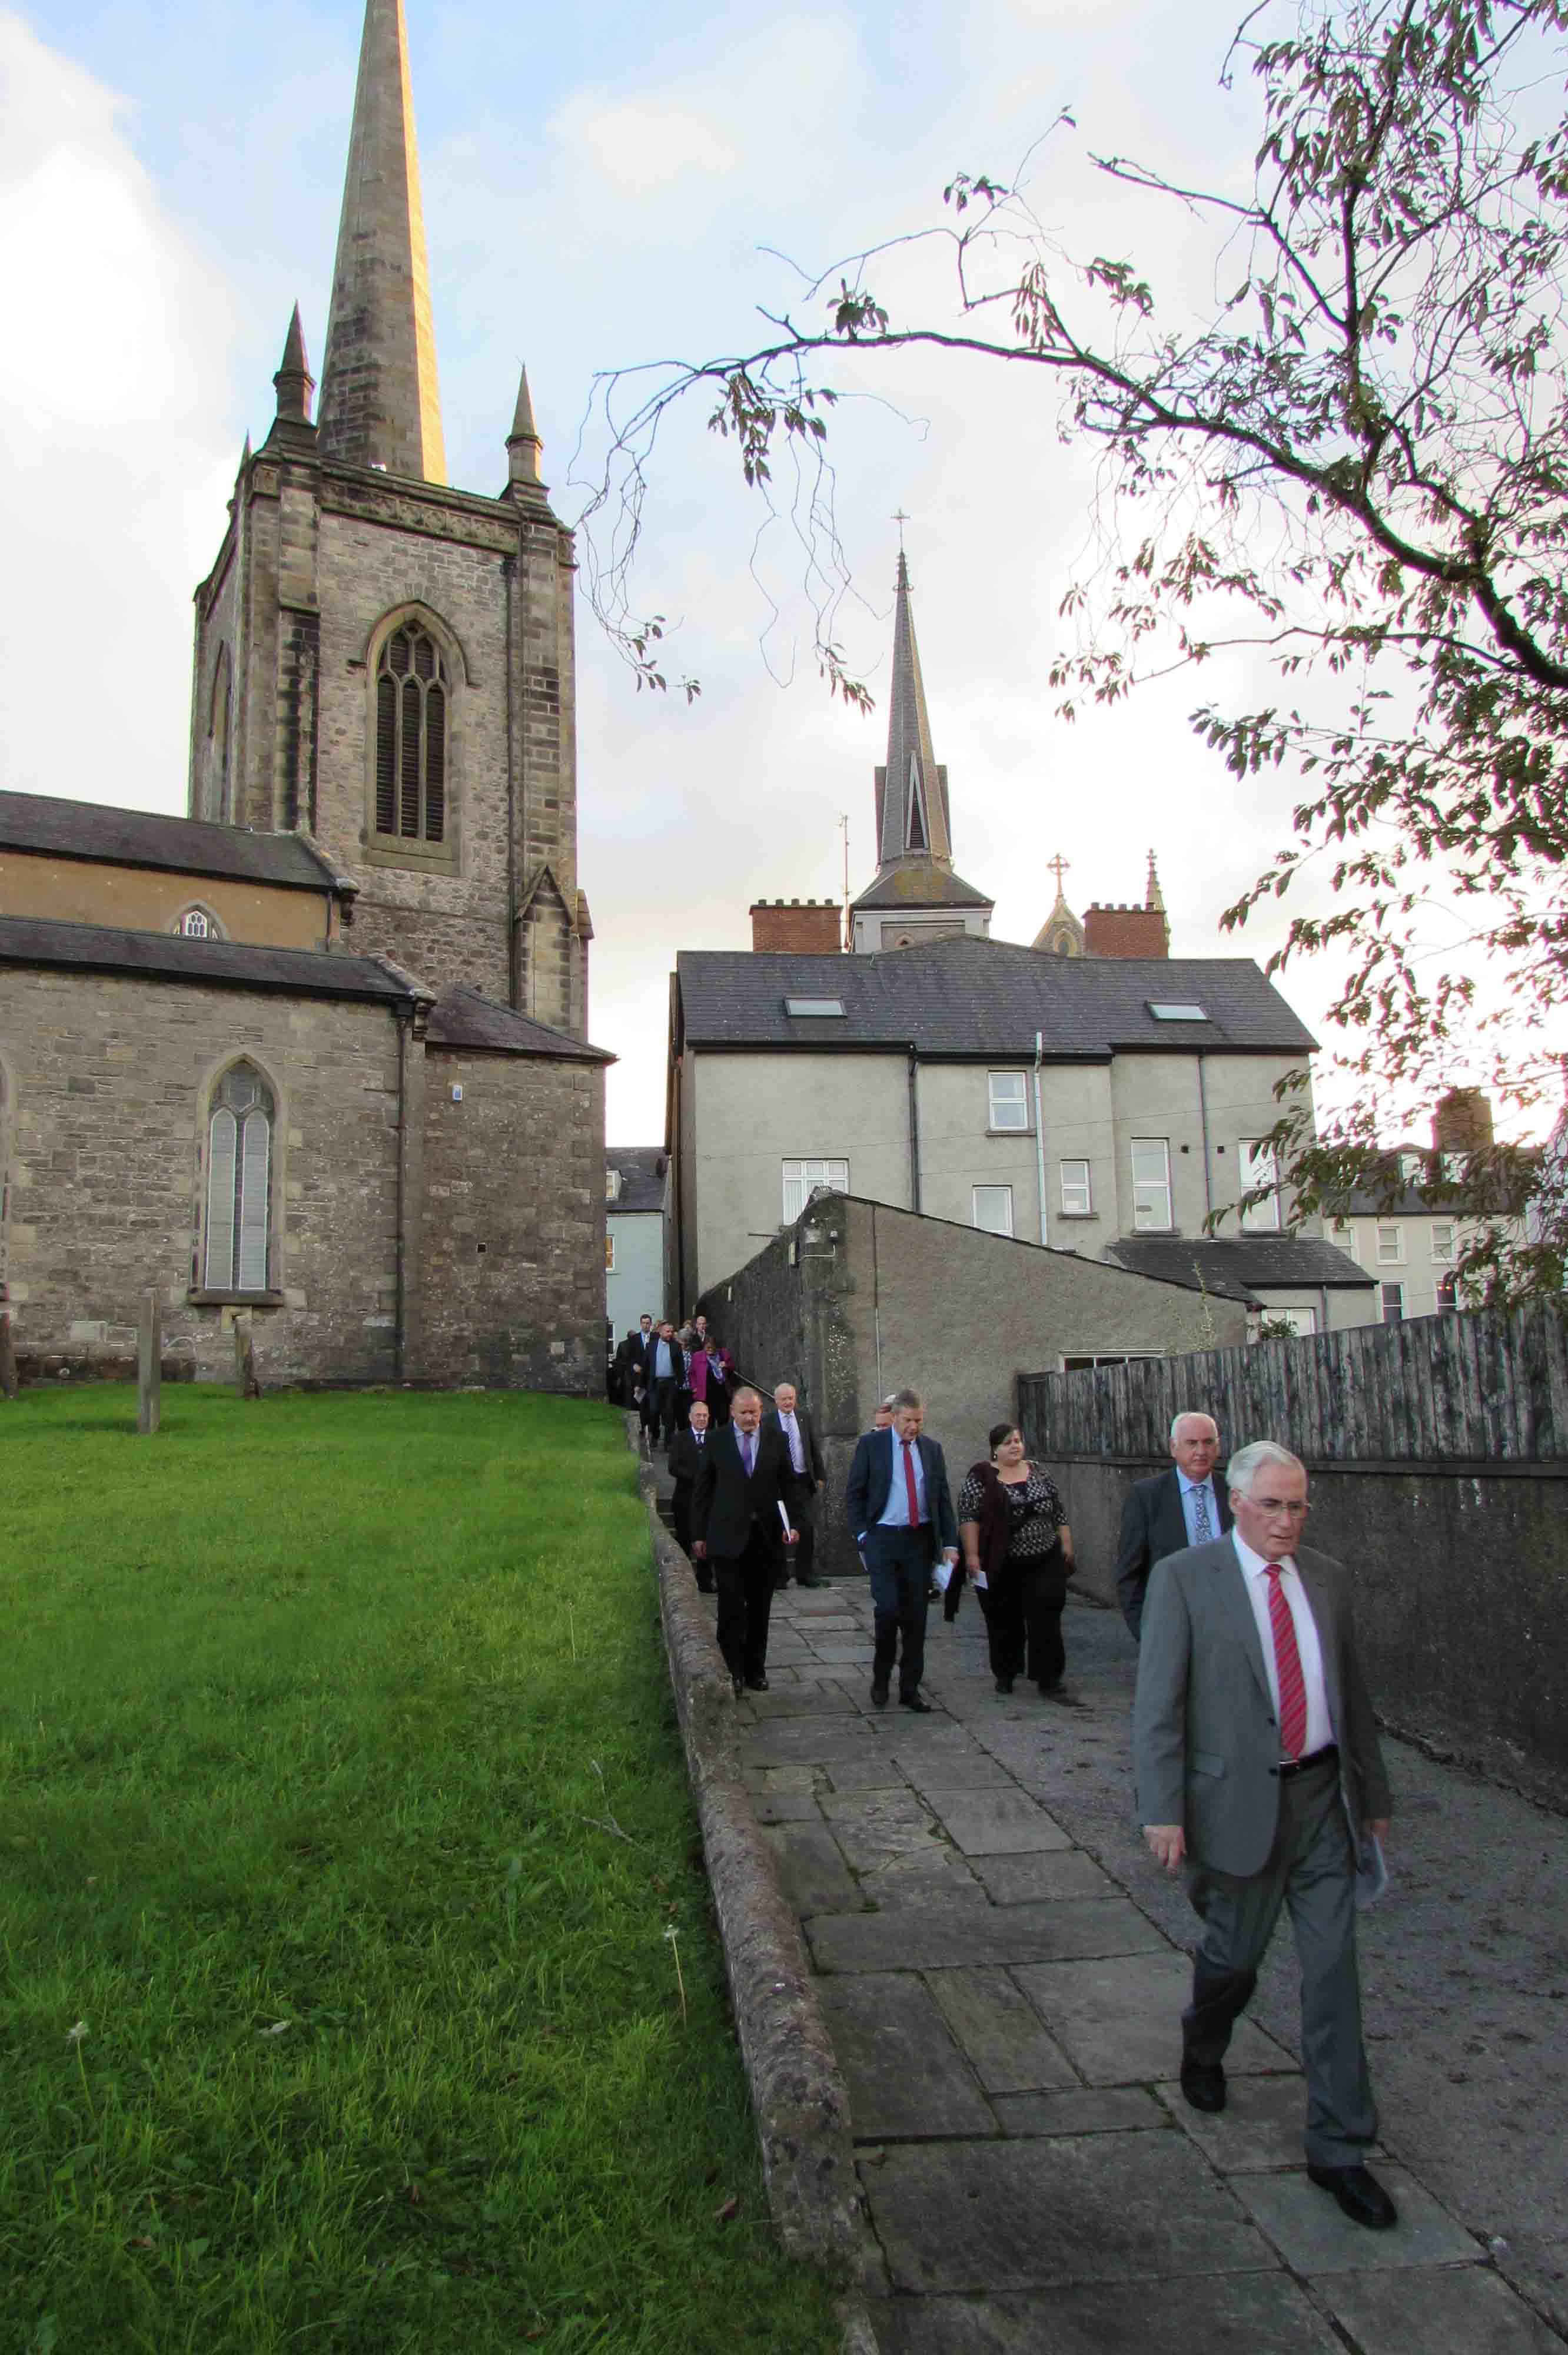 Members of Clogher Diocesan Synod making their way from St Macartin's Cathedral following a Service of Holy Communion to the Cathedral Hall for the Clogher Diocesan Synod on Thursday, 27th September 2018.